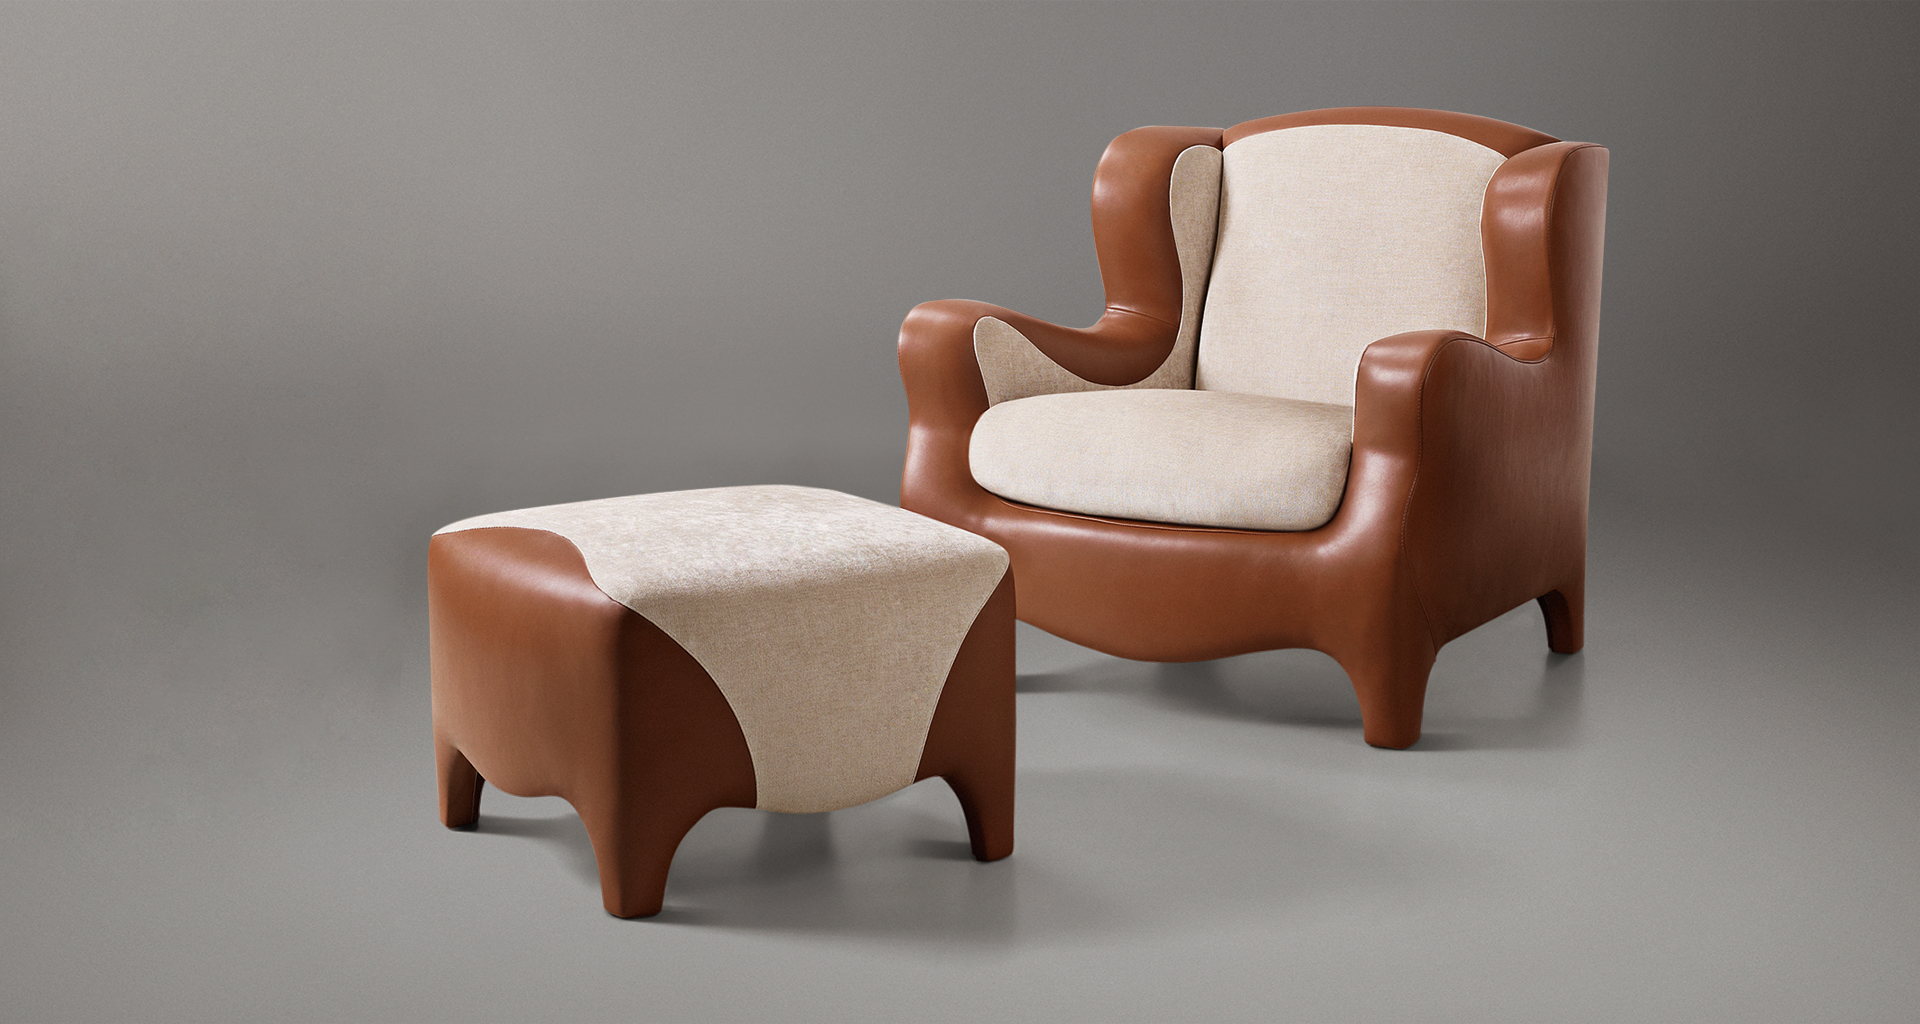 Club is an armchair with an inside covering in fabric or leather and an outer covering in leather, from Promemoria's catalogue | Promemoria